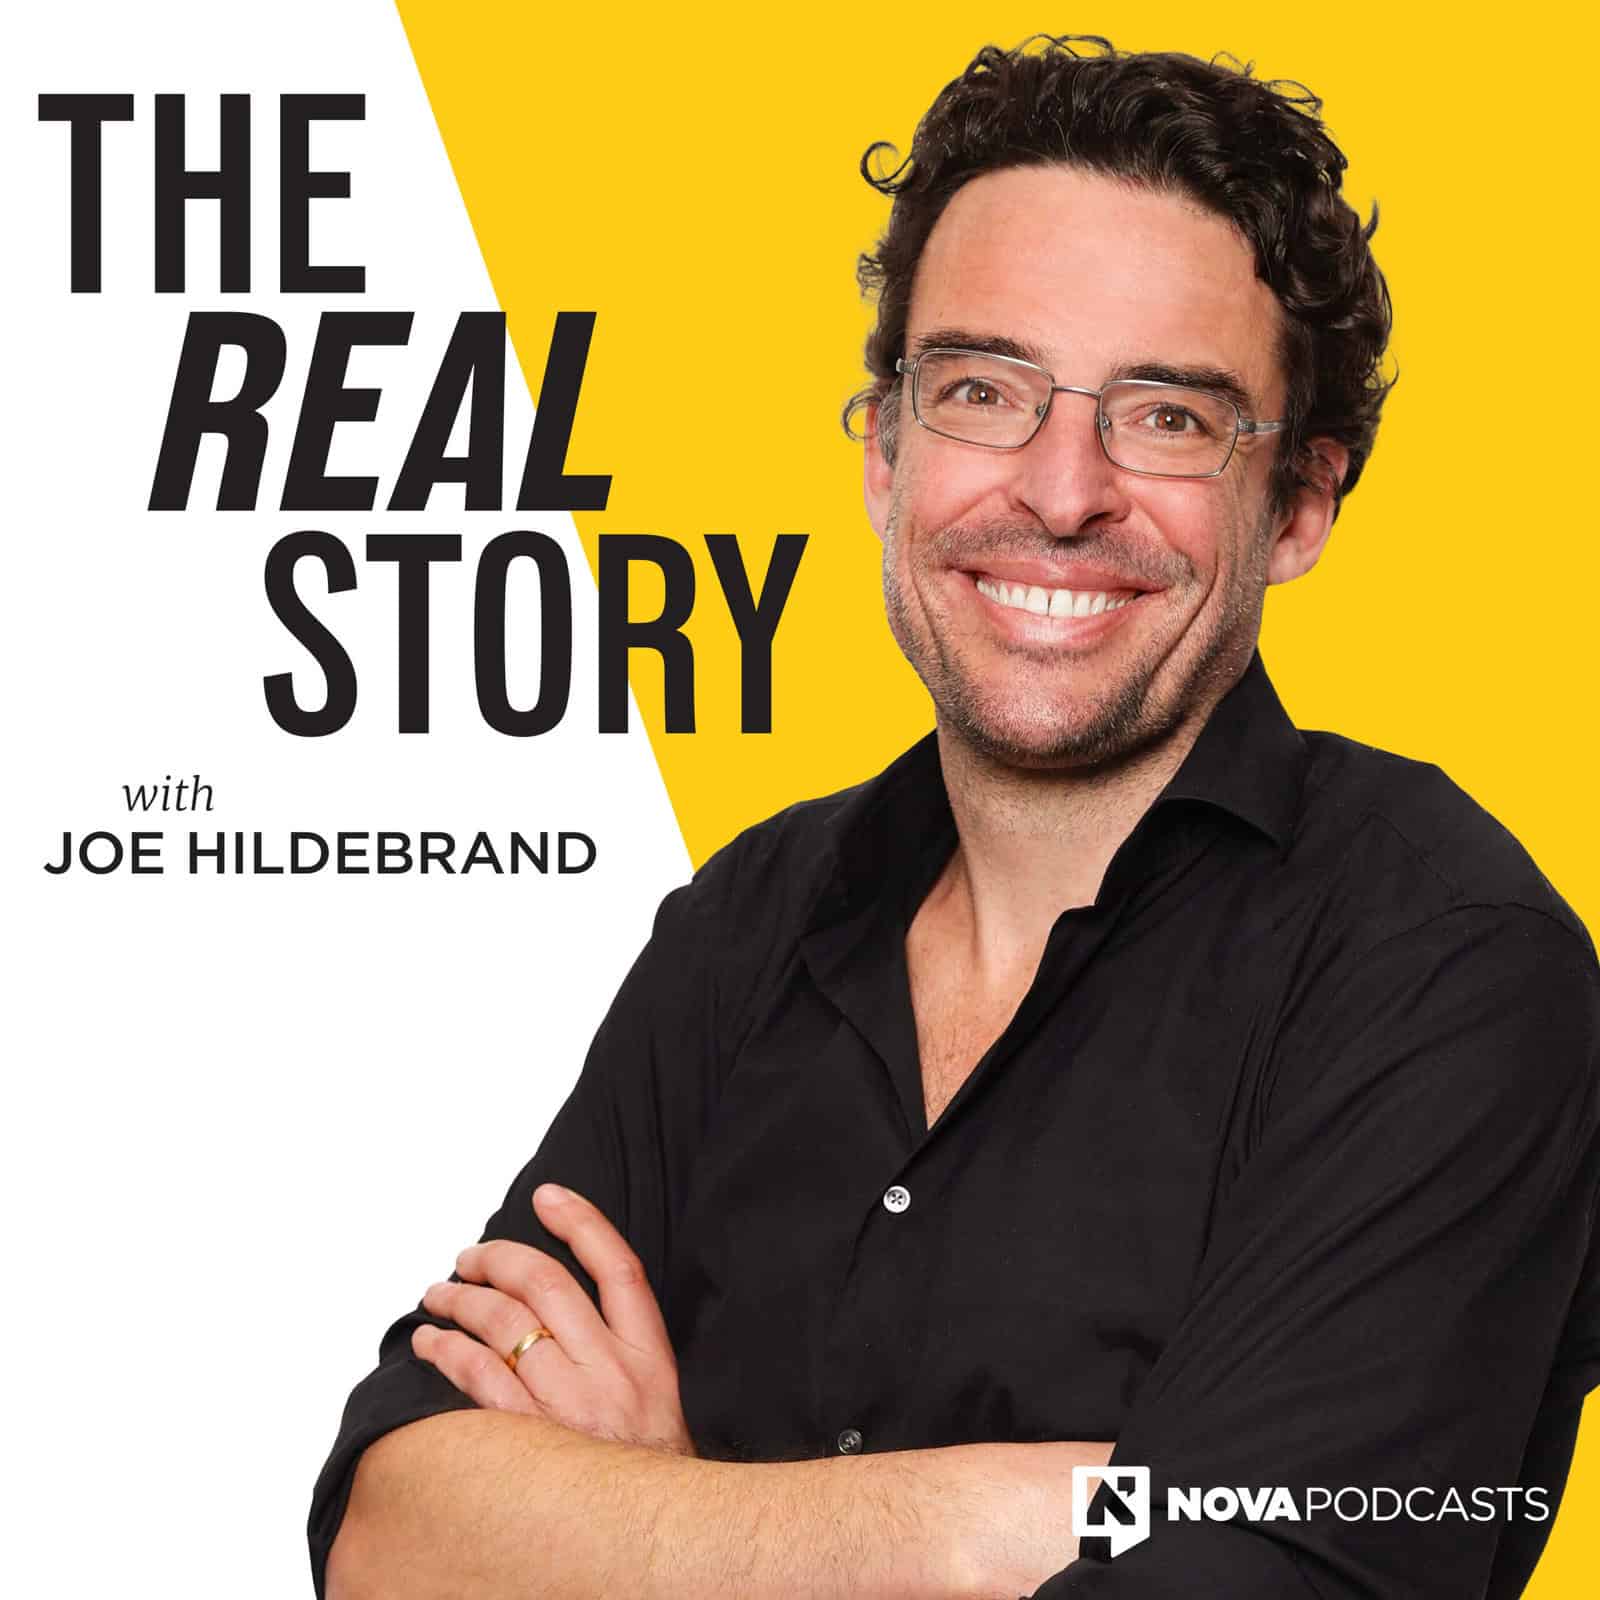 The Real Story Podcast This Is Not A Game